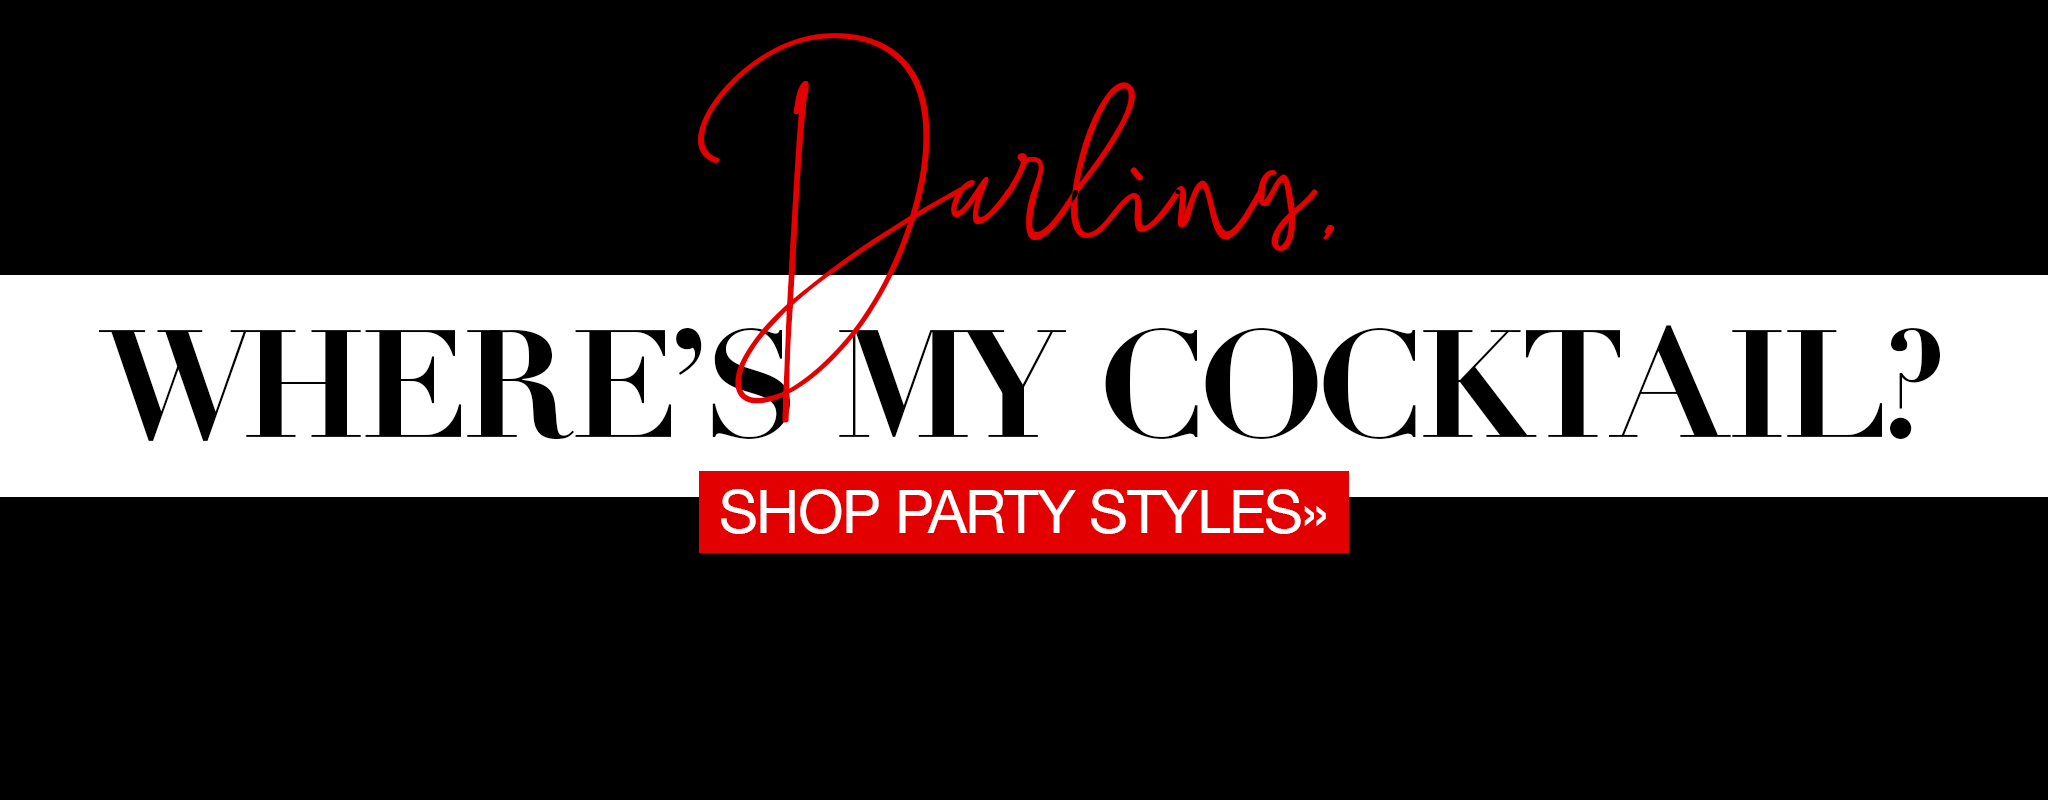 Darling, Where's my Cocktail? Shop Party Styles